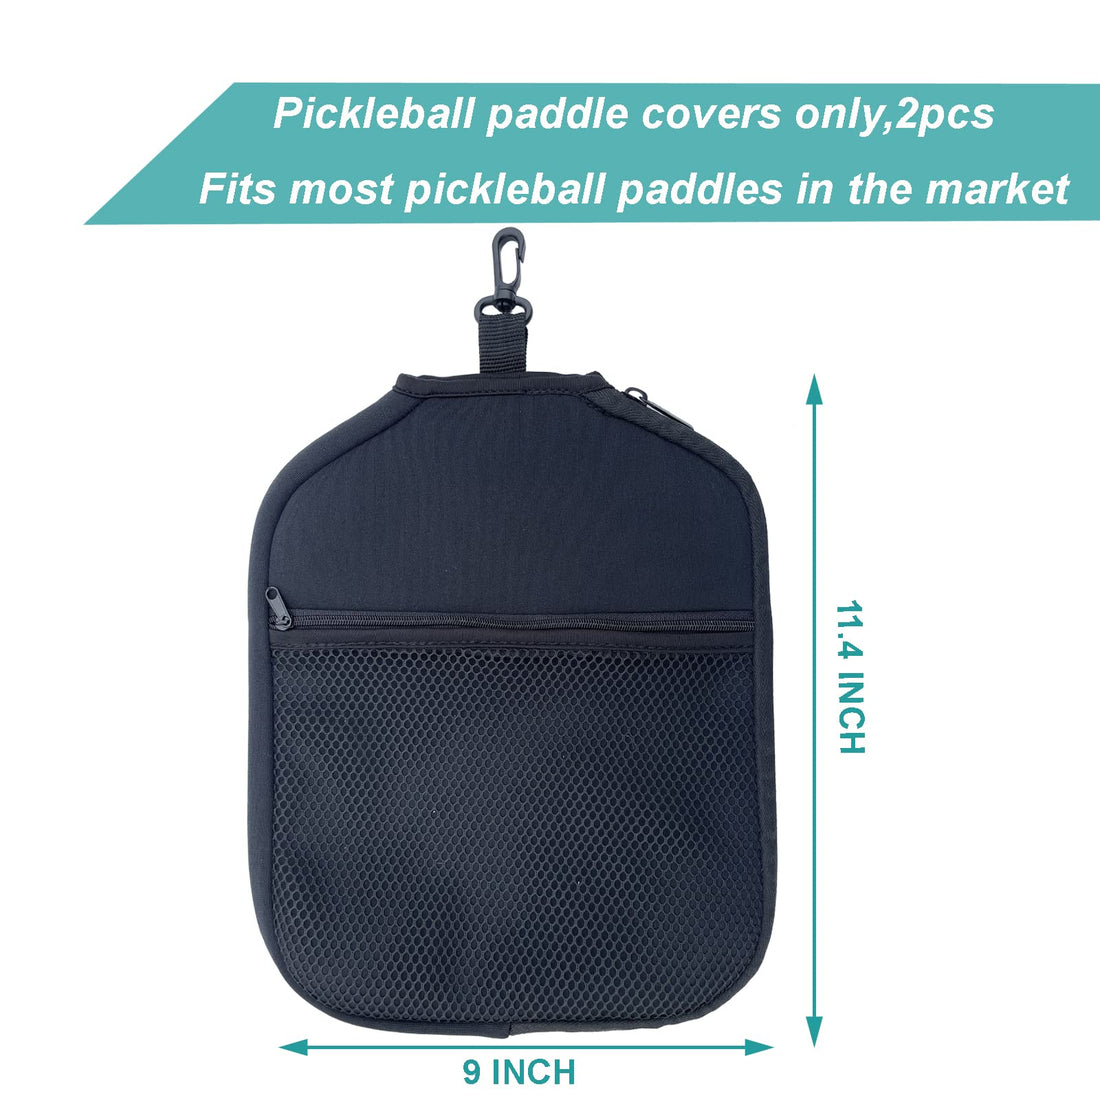 2 Improved Pickleball Paddle Covers